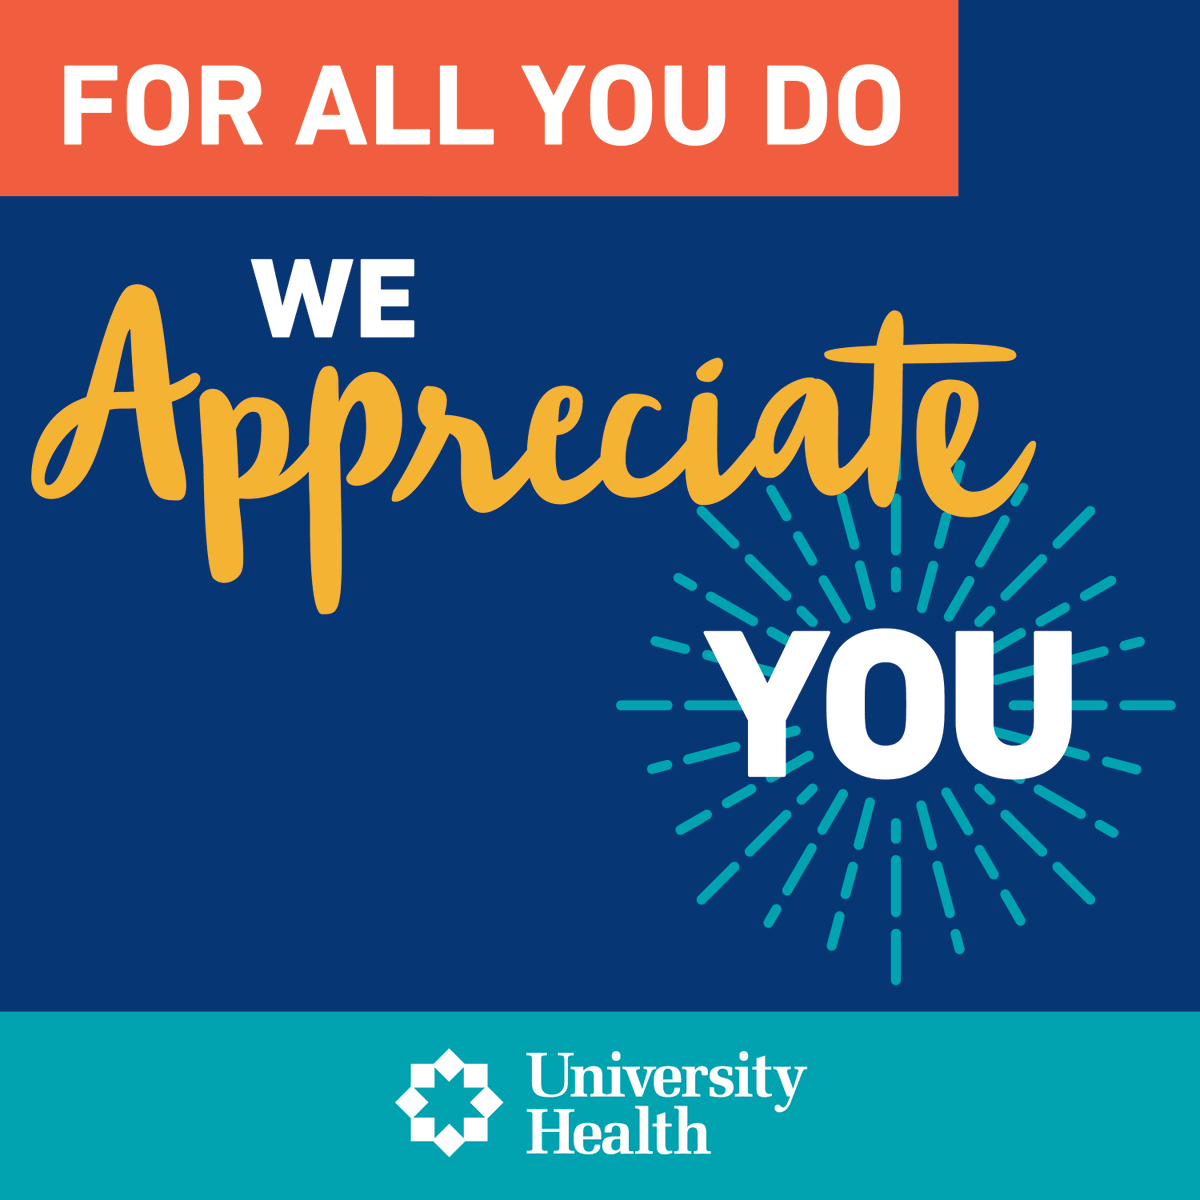 Happy #HospitalWeek! This week gives us the opportunity to celebrate all our amazing employees. We appreciate the ways our team cares for our community year-round. Thank you for all you do! You are why University Health continues to be a trusted health institution in South Texas.